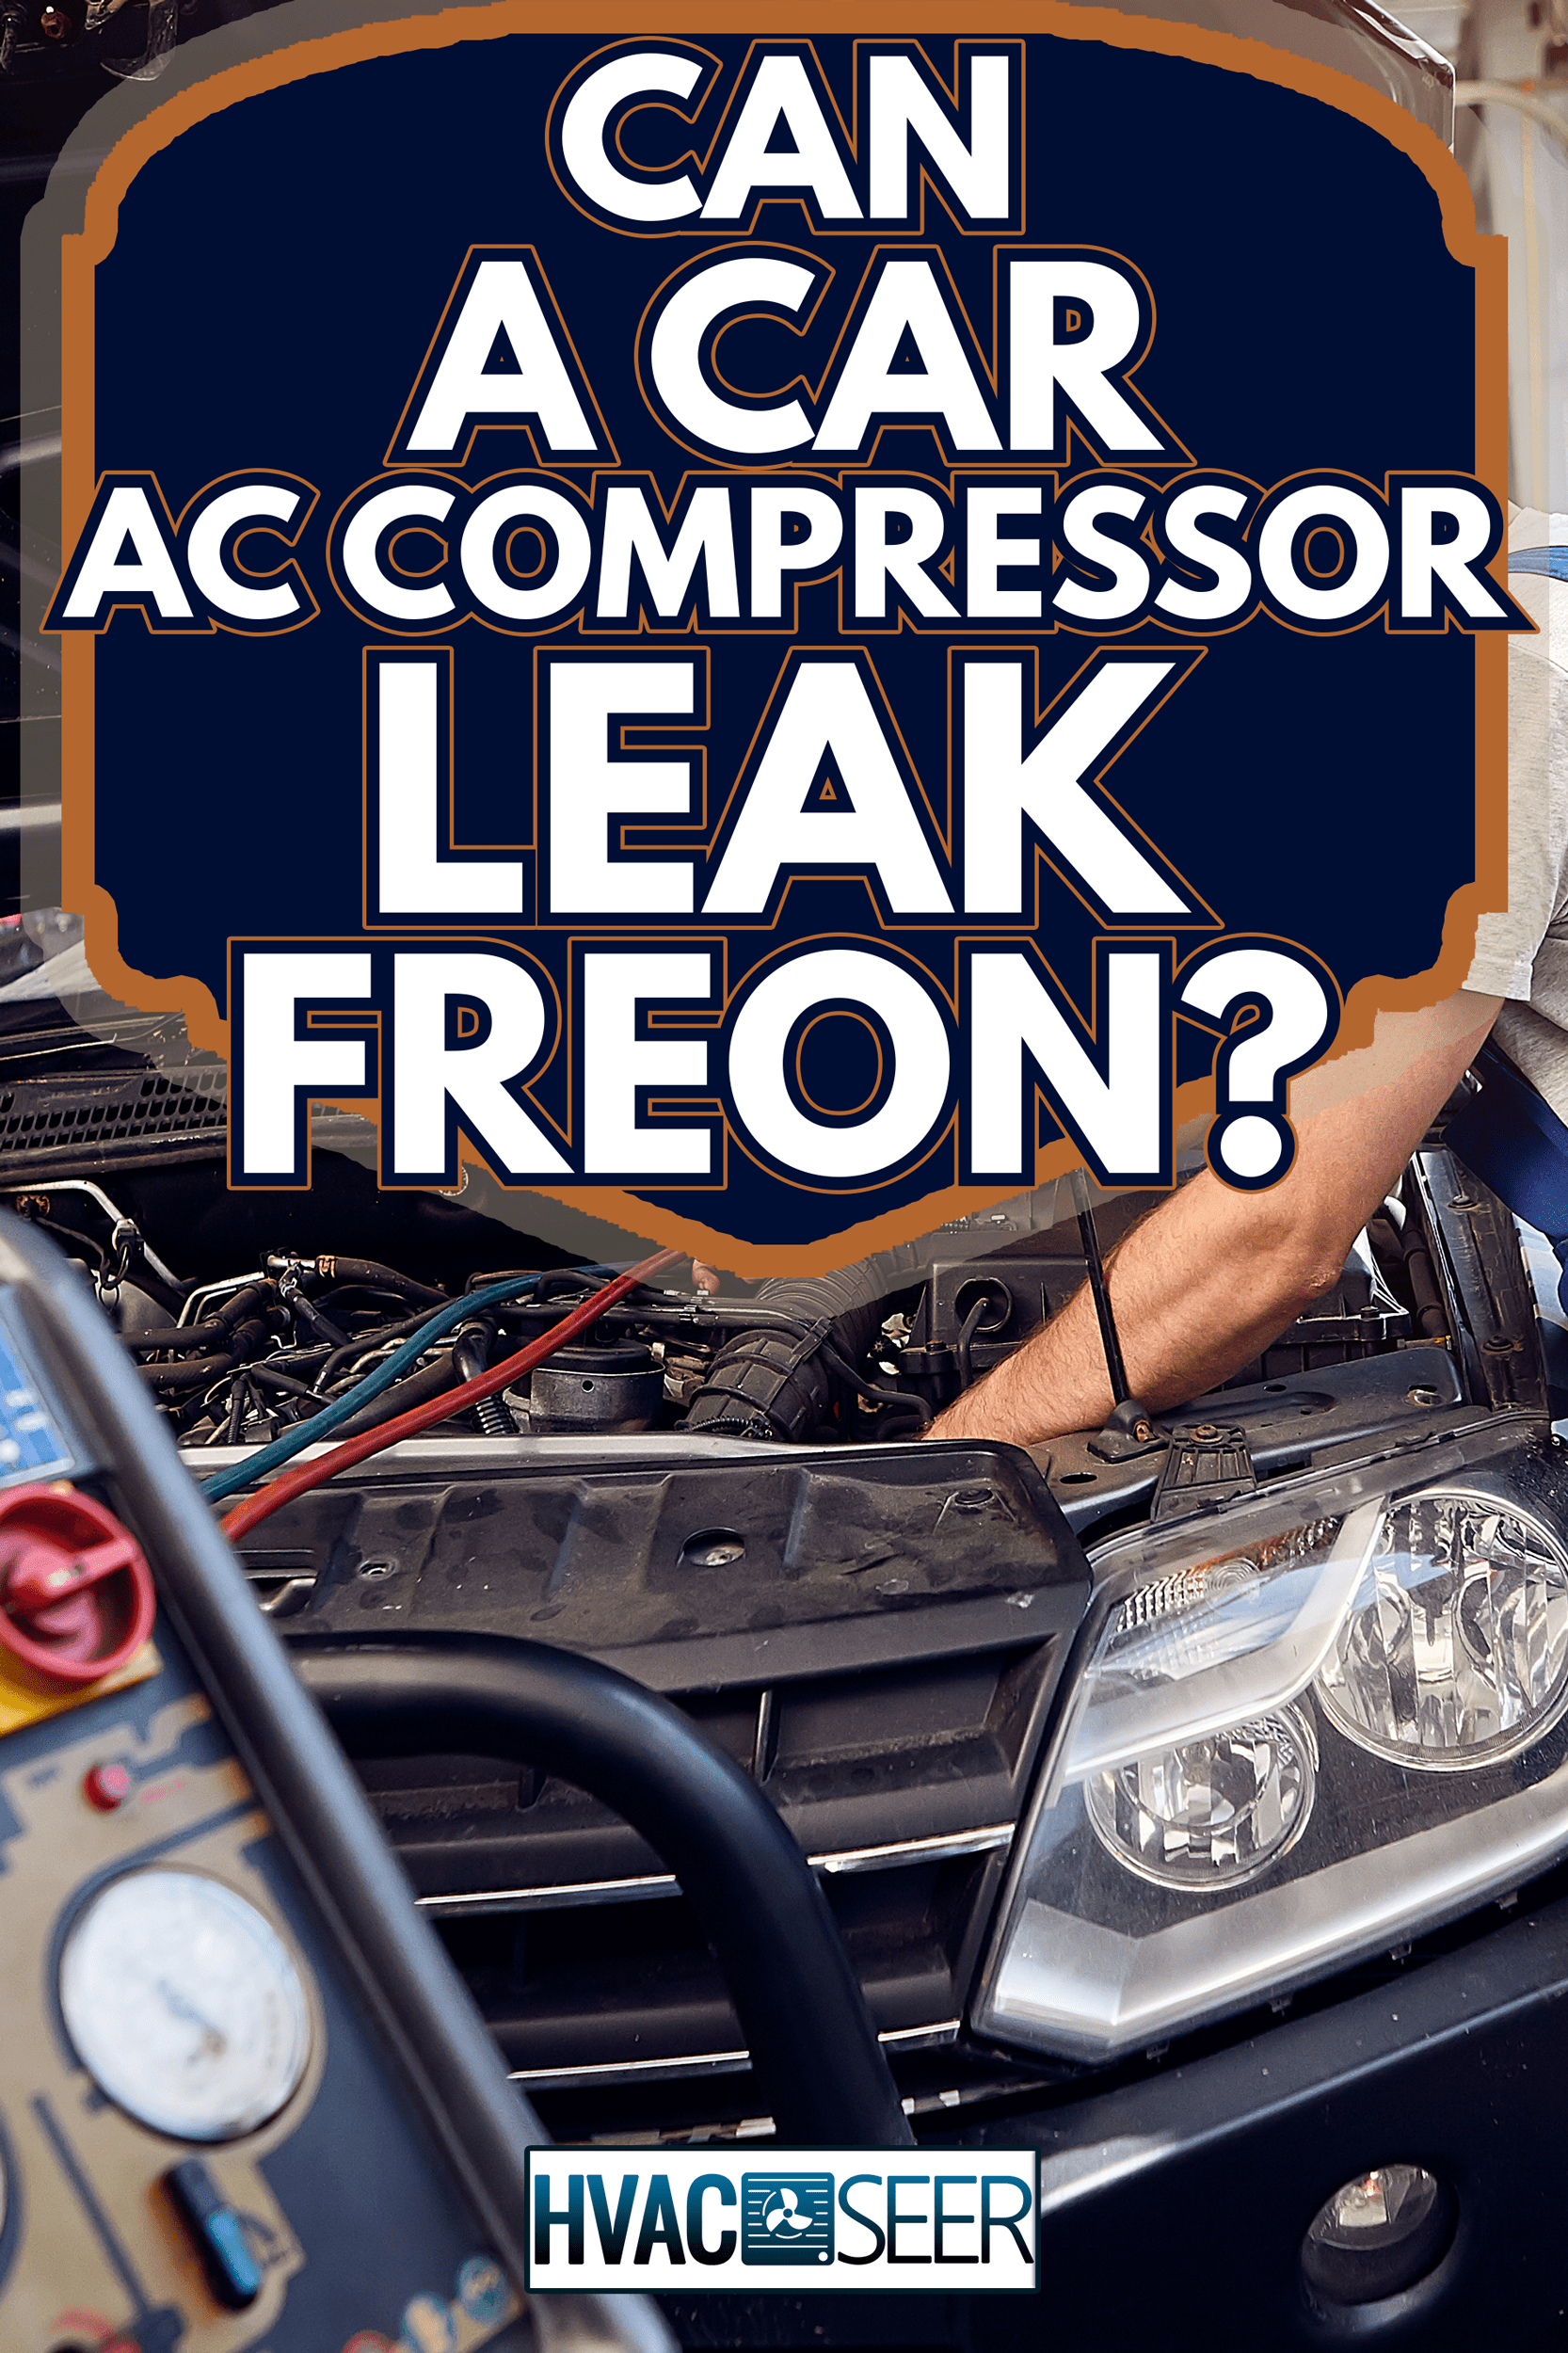 Refueling the air conditioner. A mechanic pumps freon into the air conditioning system at a car service - Can A Car AC Compressor Leak Freon